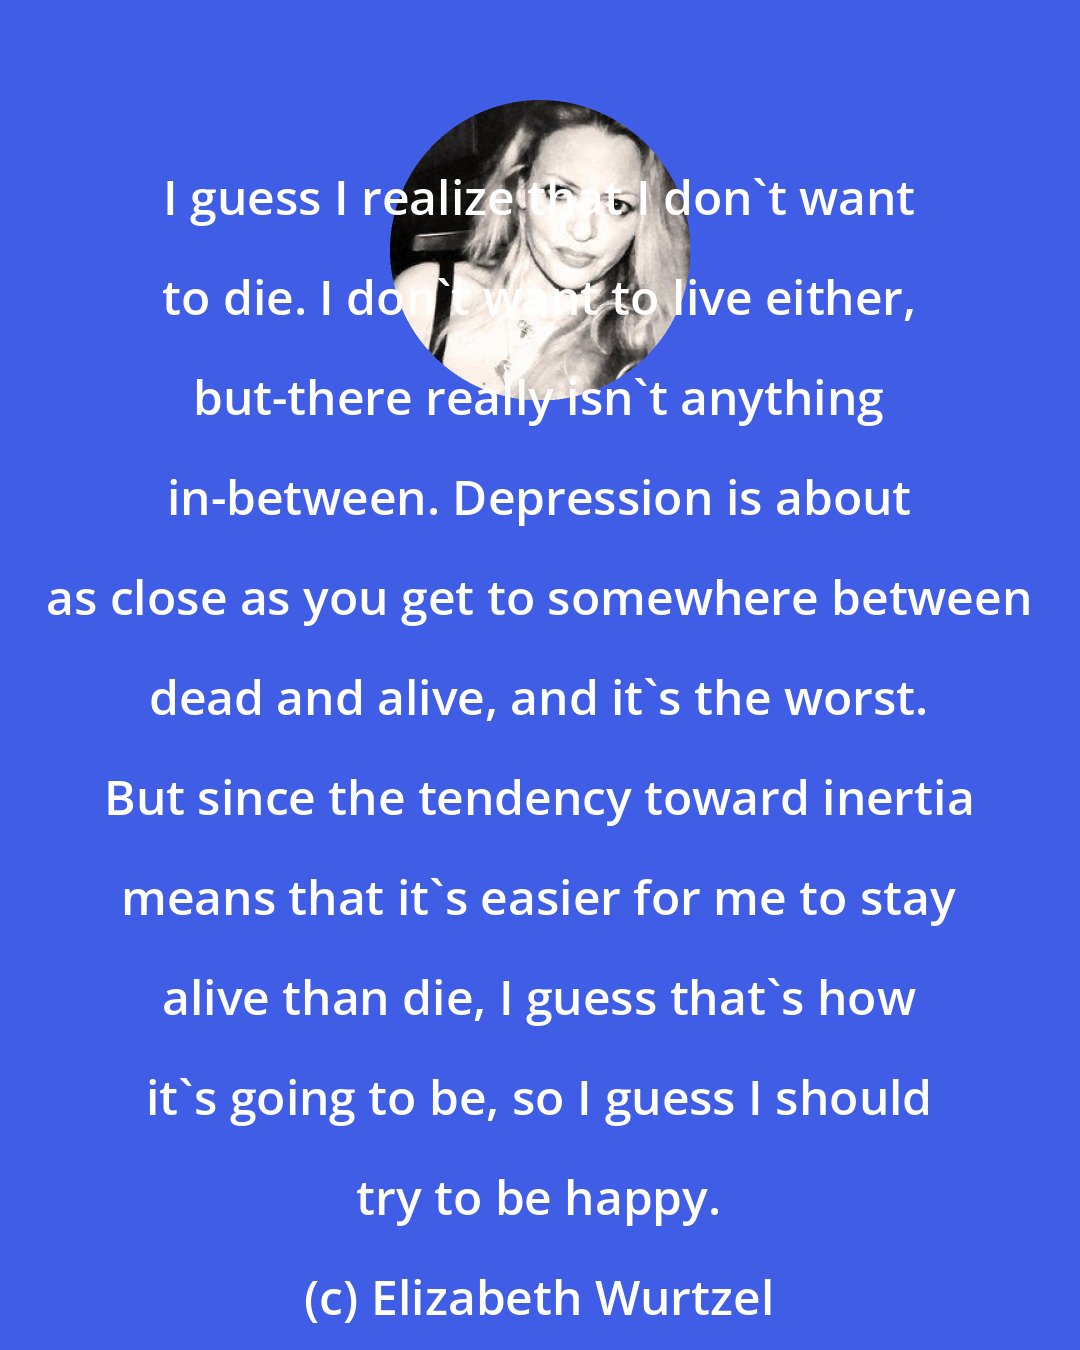 Elizabeth Wurtzel: I guess I realize that I don't want to die. I don't want to live either, but-there really isn't anything in-between. Depression is about as close as you get to somewhere between dead and alive, and it's the worst. But since the tendency toward inertia means that it's easier for me to stay alive than die, I guess that's how it's going to be, so I guess I should try to be happy.